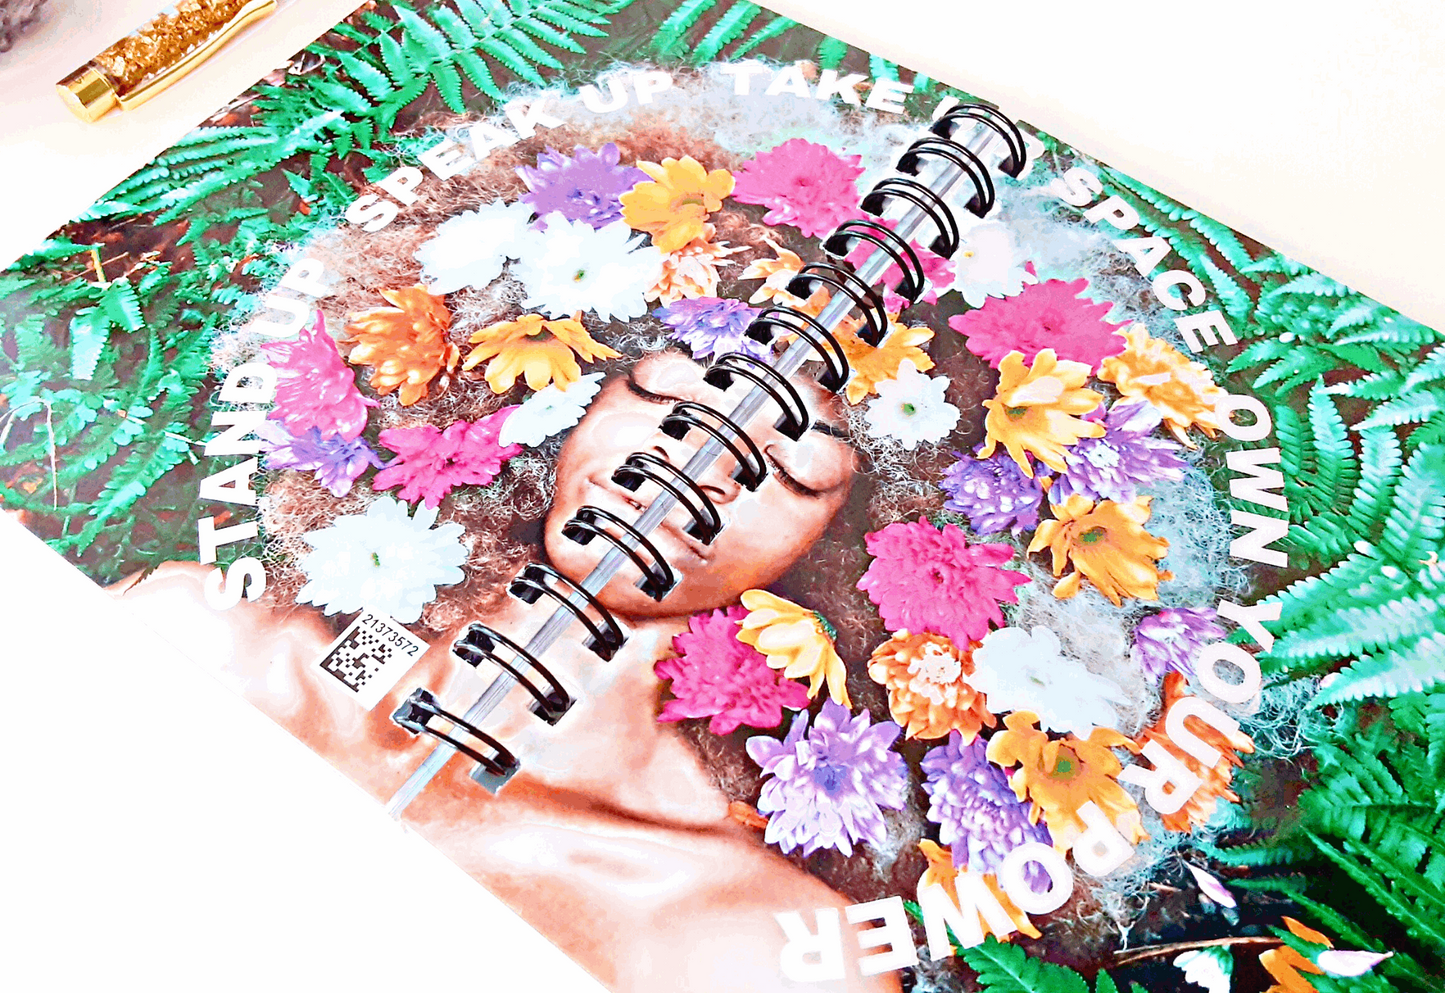 Floral Afrocentric Journal With Multi Colored Flowers